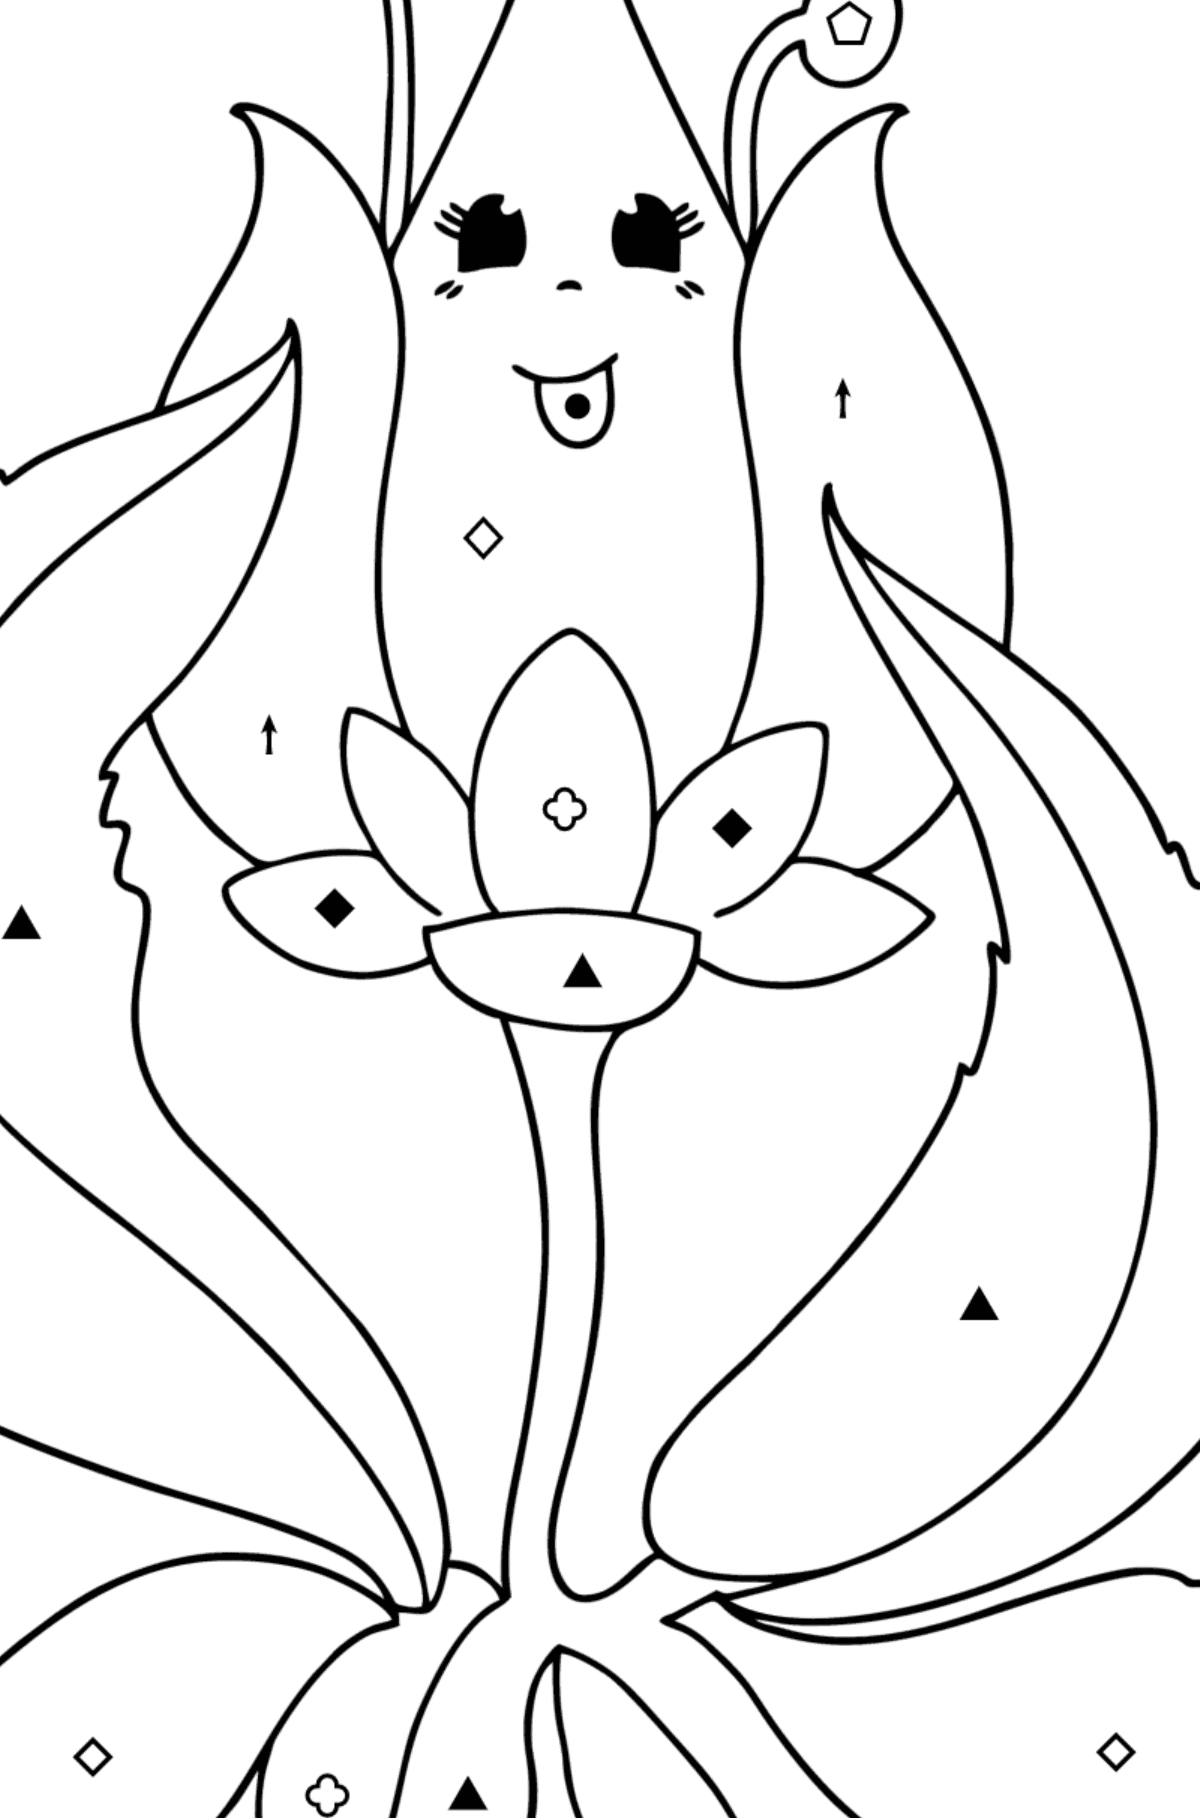 Bud with eyes coloring page - Coloring by Symbols and Geometric Shapes for Kids